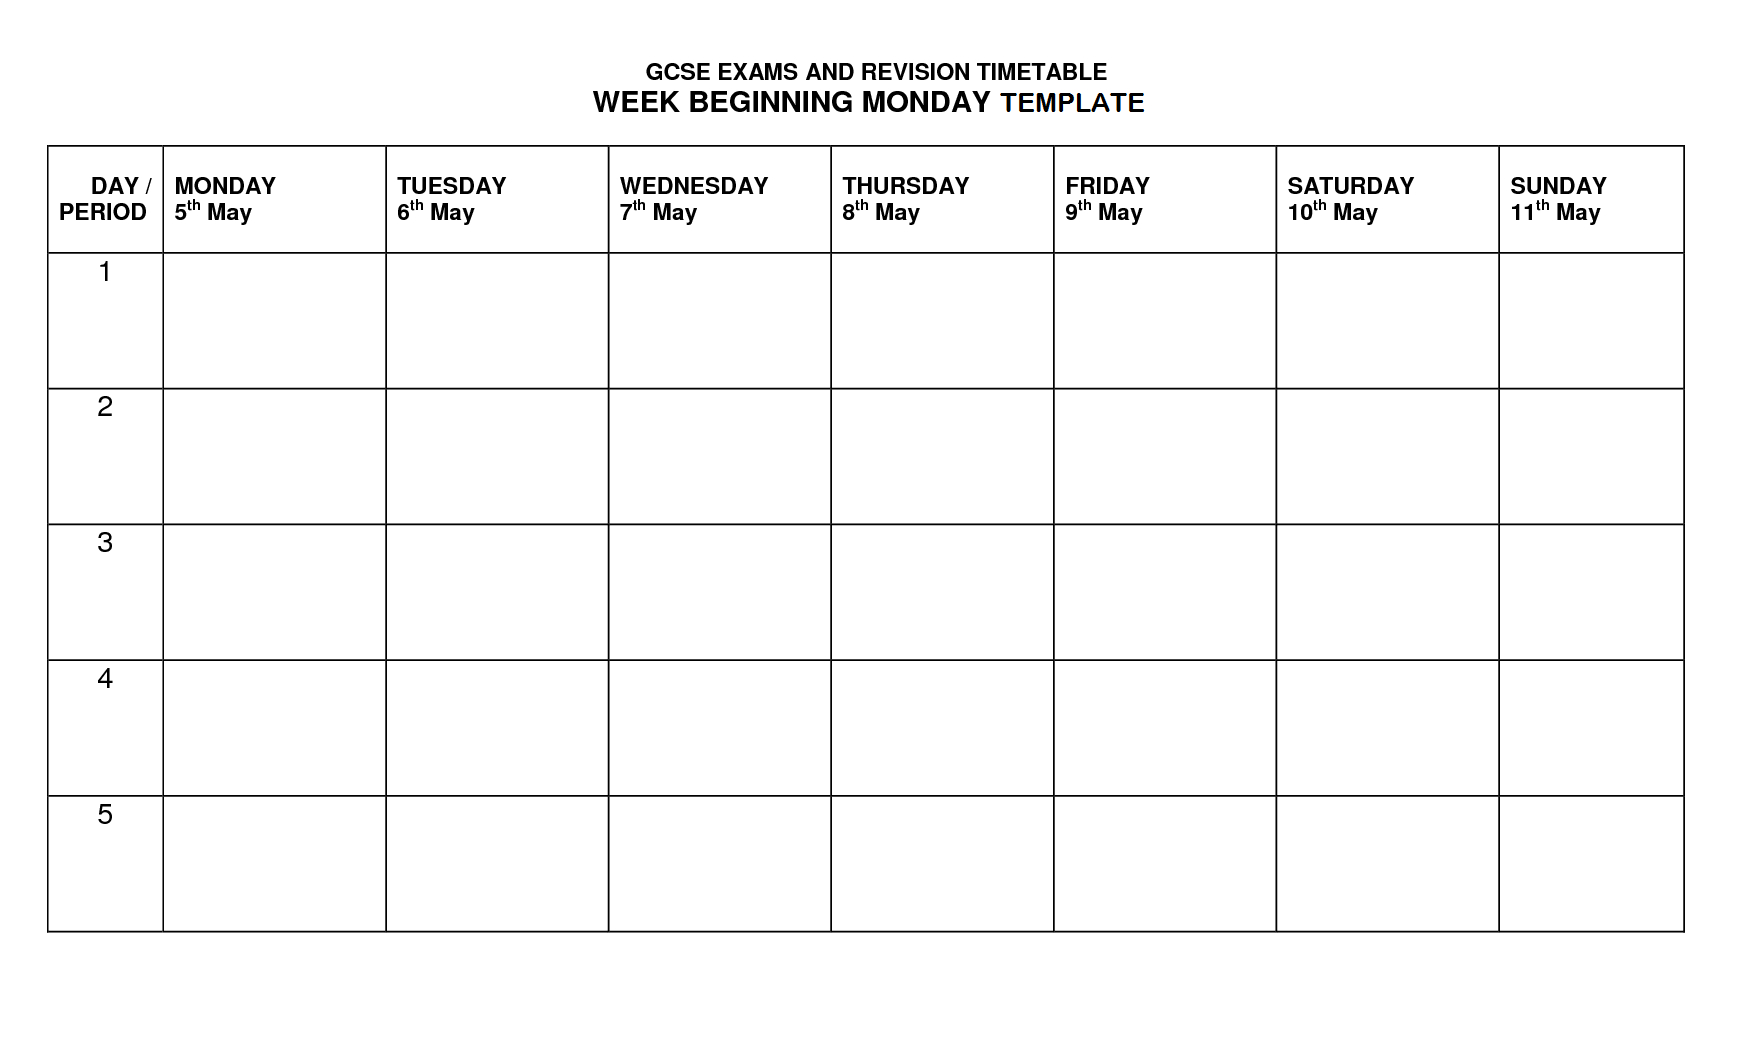 Timetable Template | Timetable Template, Class Schedule With Regard To Blank Revision Timetable Template